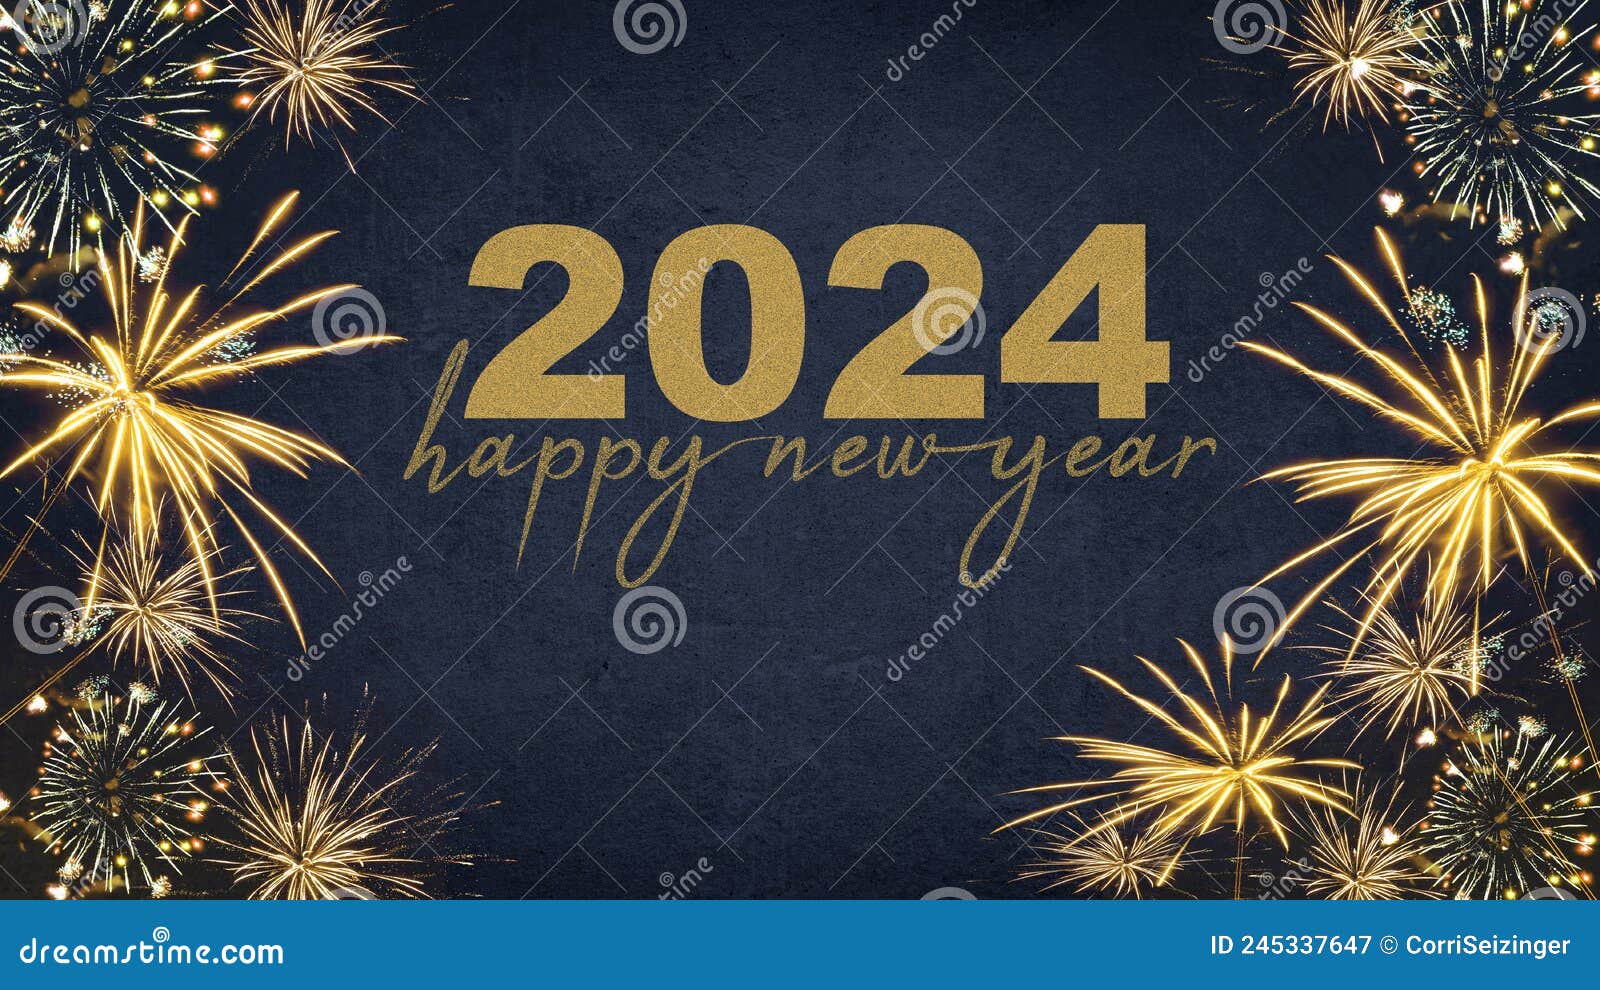 happy new year 2024 - festive silvester new year`s eve party background greeting card - golden fireworks in the dark blue night